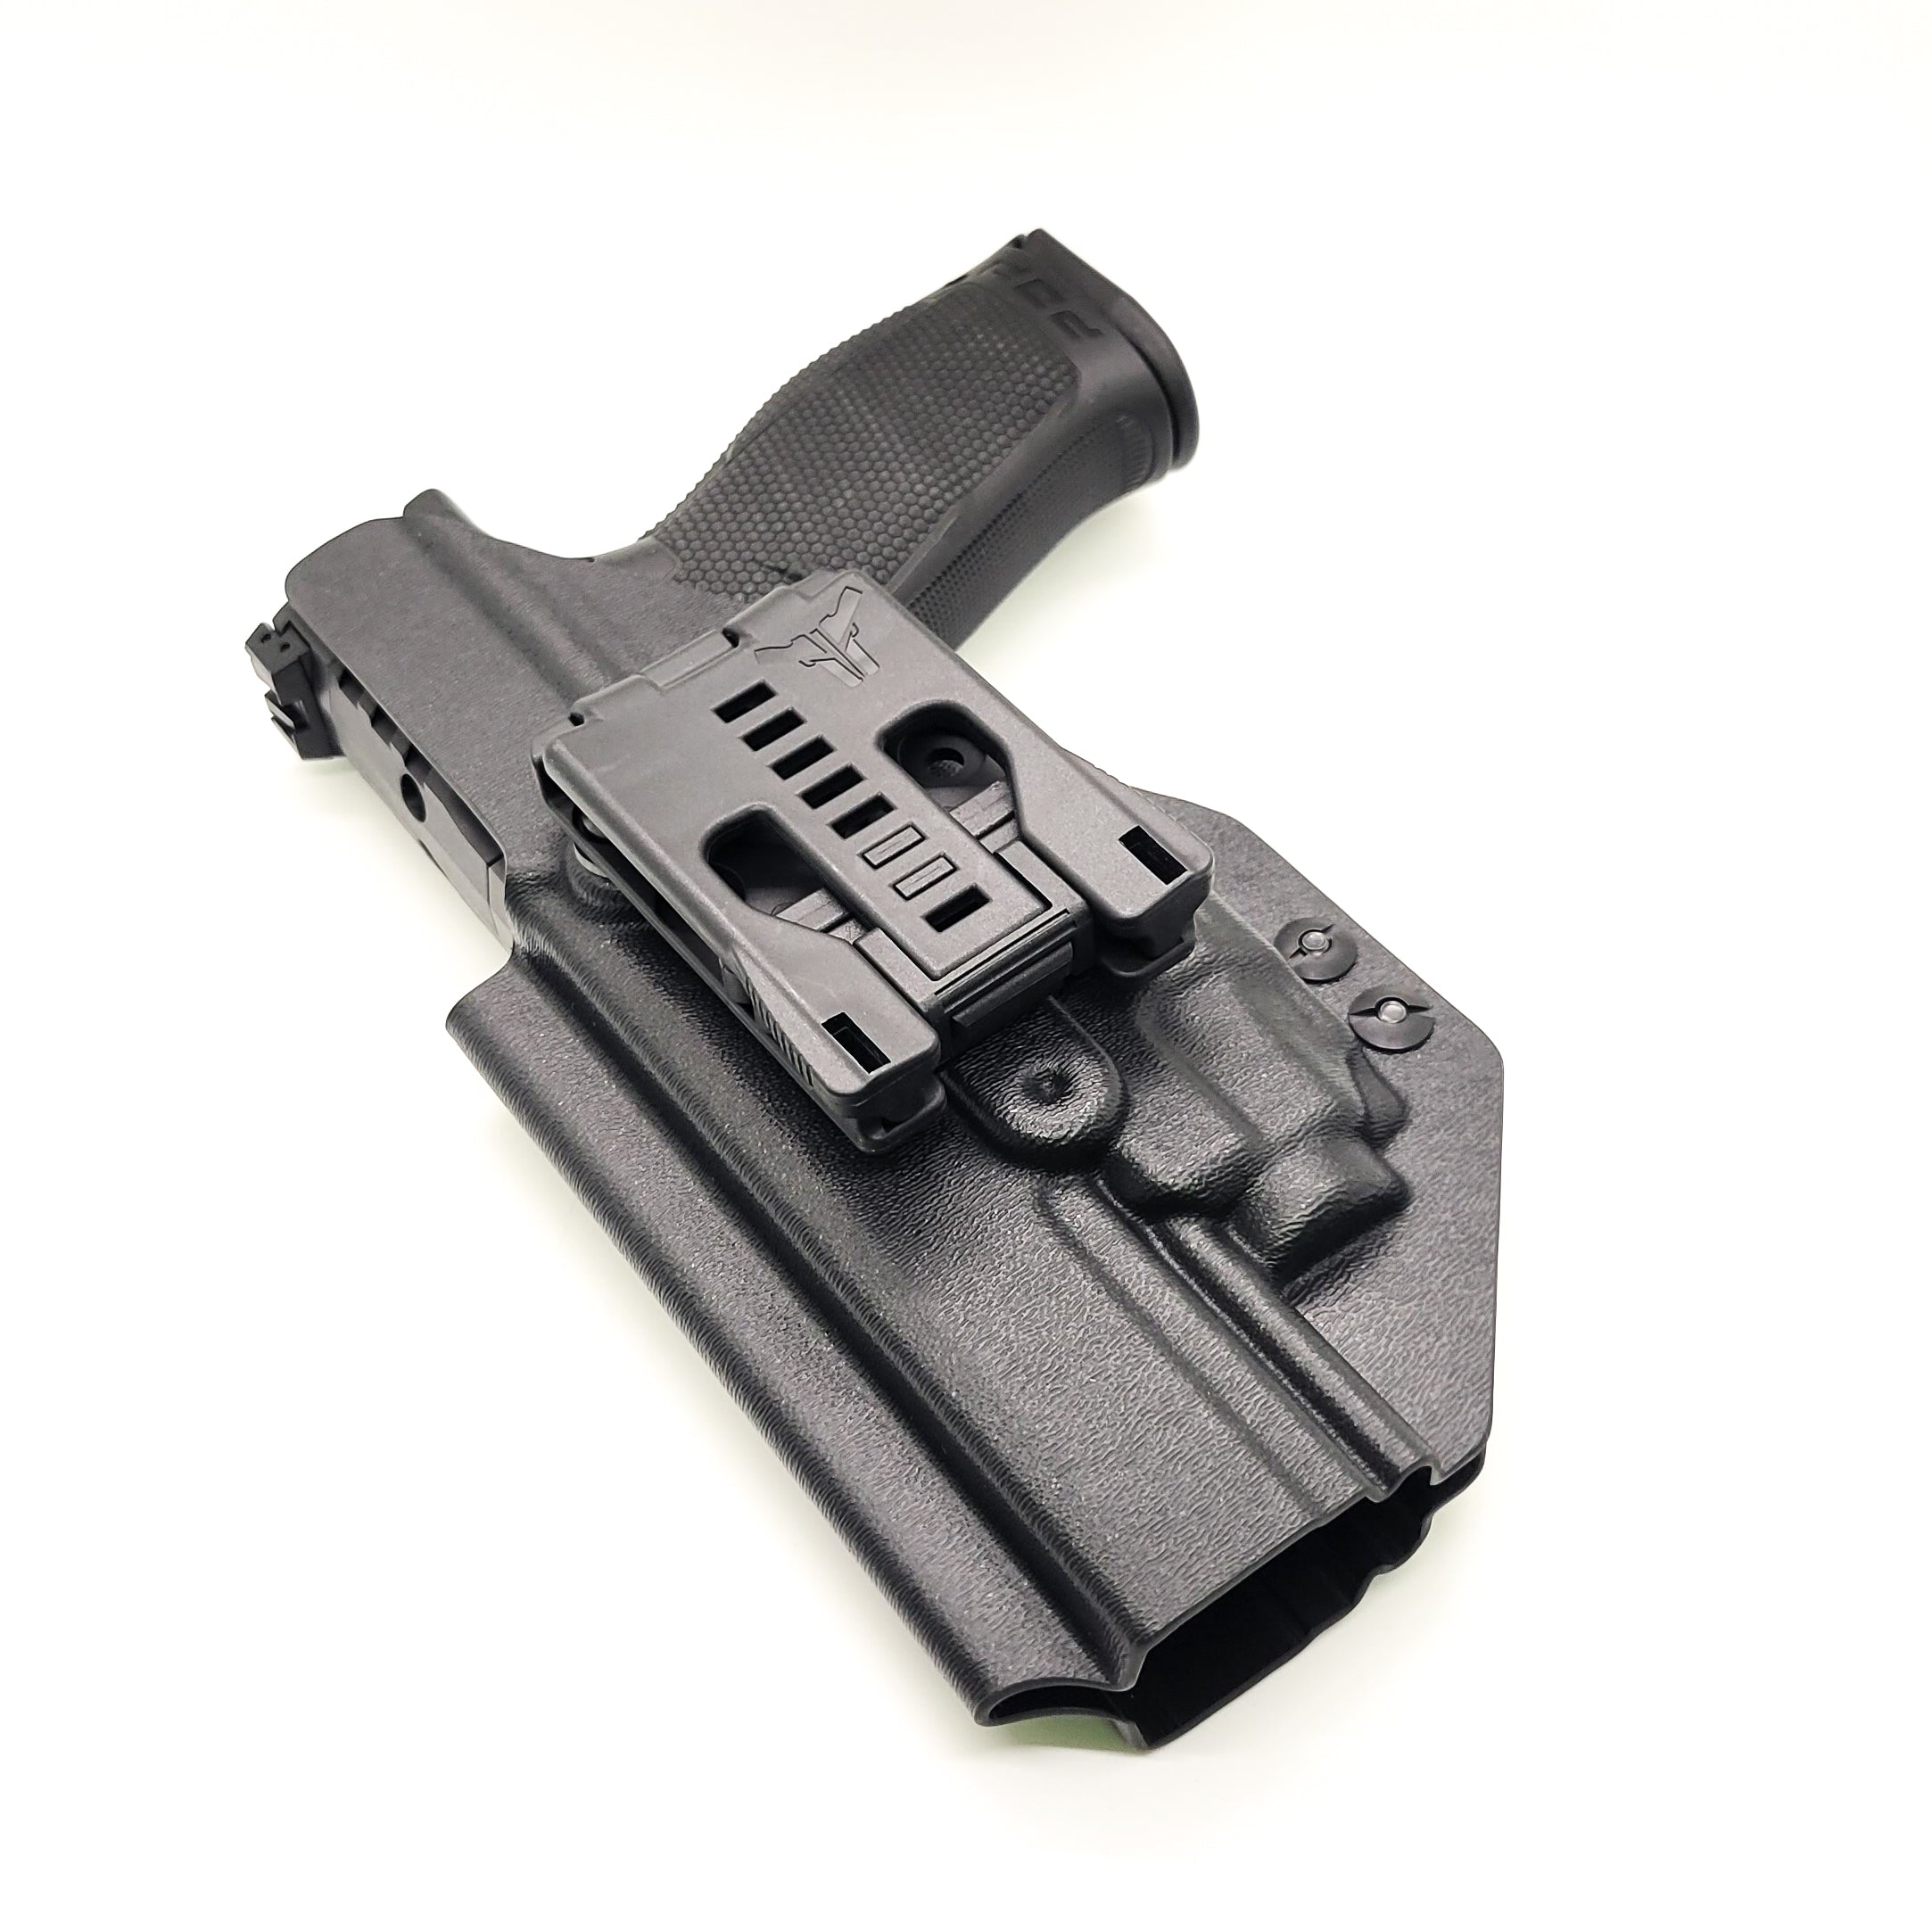 For the best Outside Waistband Taco Style Holster designed to fit the Walther PDP Pro SD  4.6" pistol with the Streamlight TLR-8 mounted on the firearm, shop Four Brothers Holsters. Cut for red dot sight, full sweat guard, adjustable retention & open muzzle for threaded barrels & compensators. 